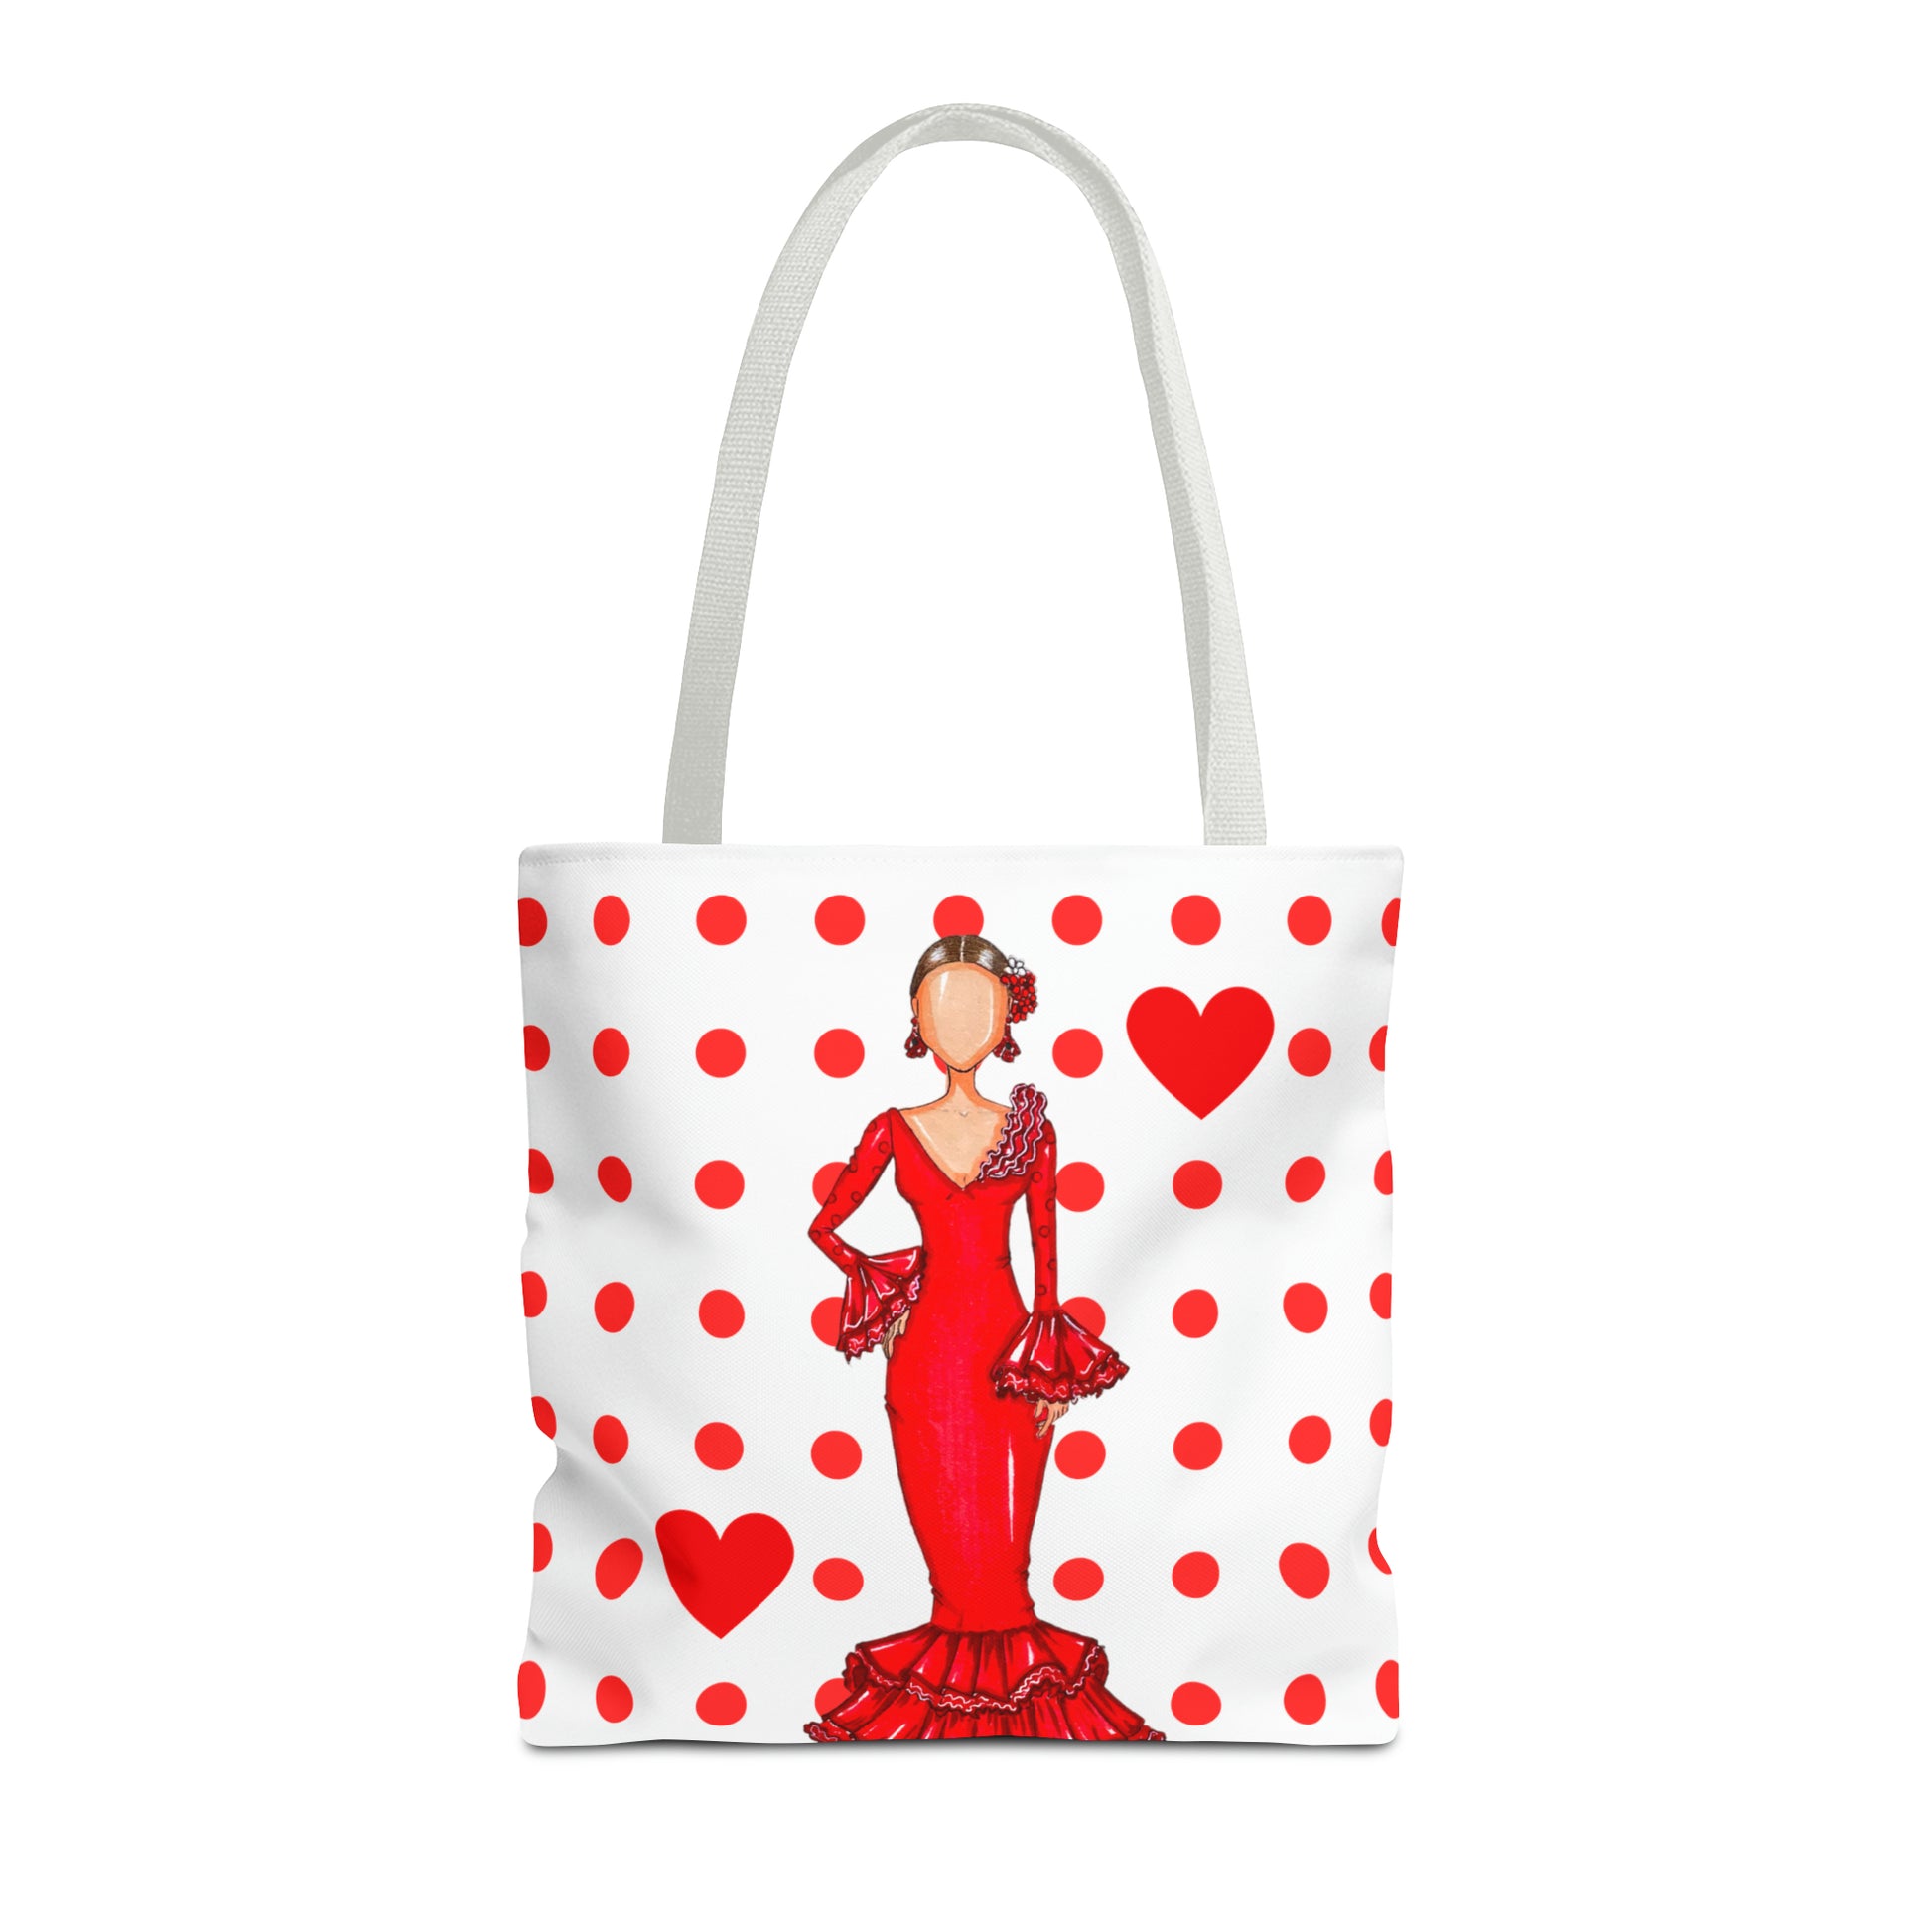 a tote bag with a lady in a red dress